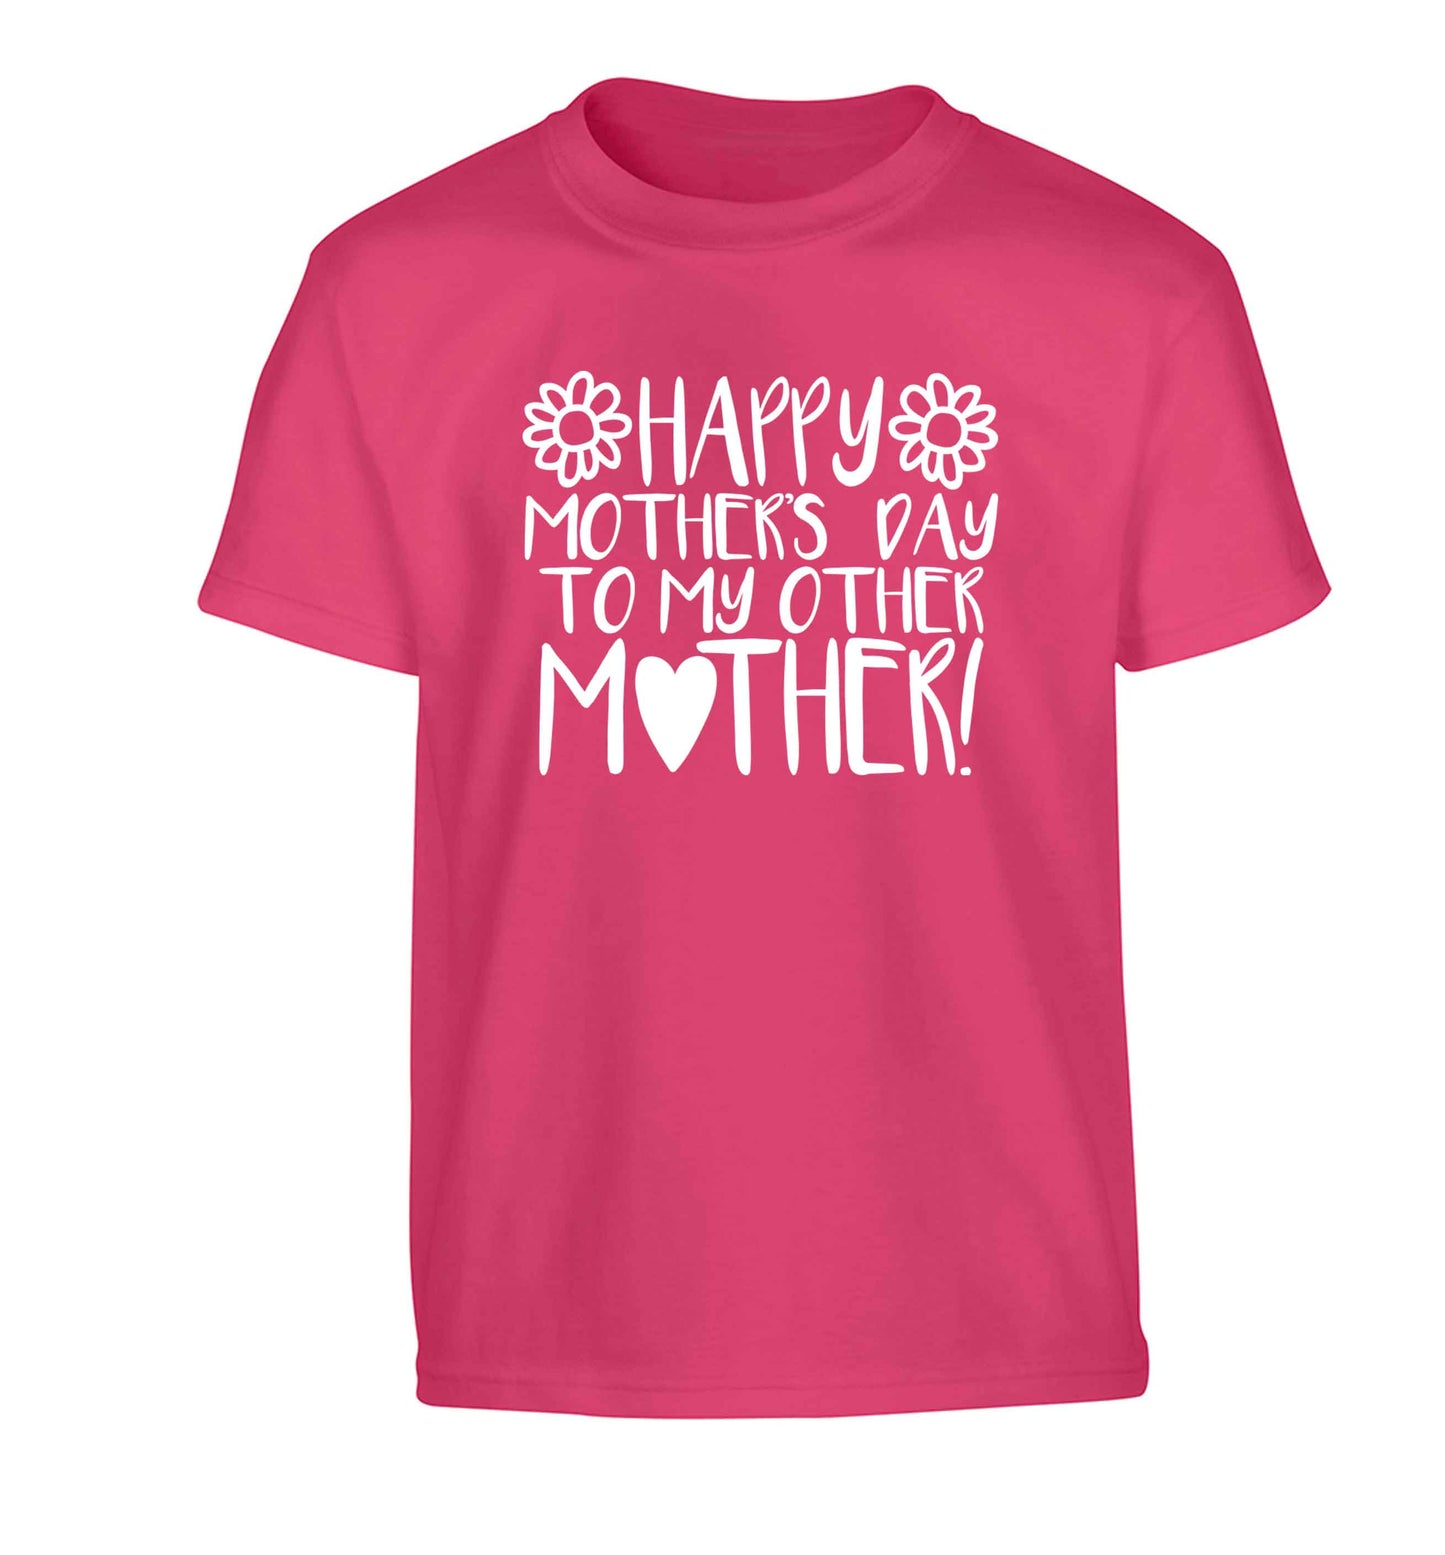 Happy mother's day to my other mother Children's pink Tshirt 12-13 Years